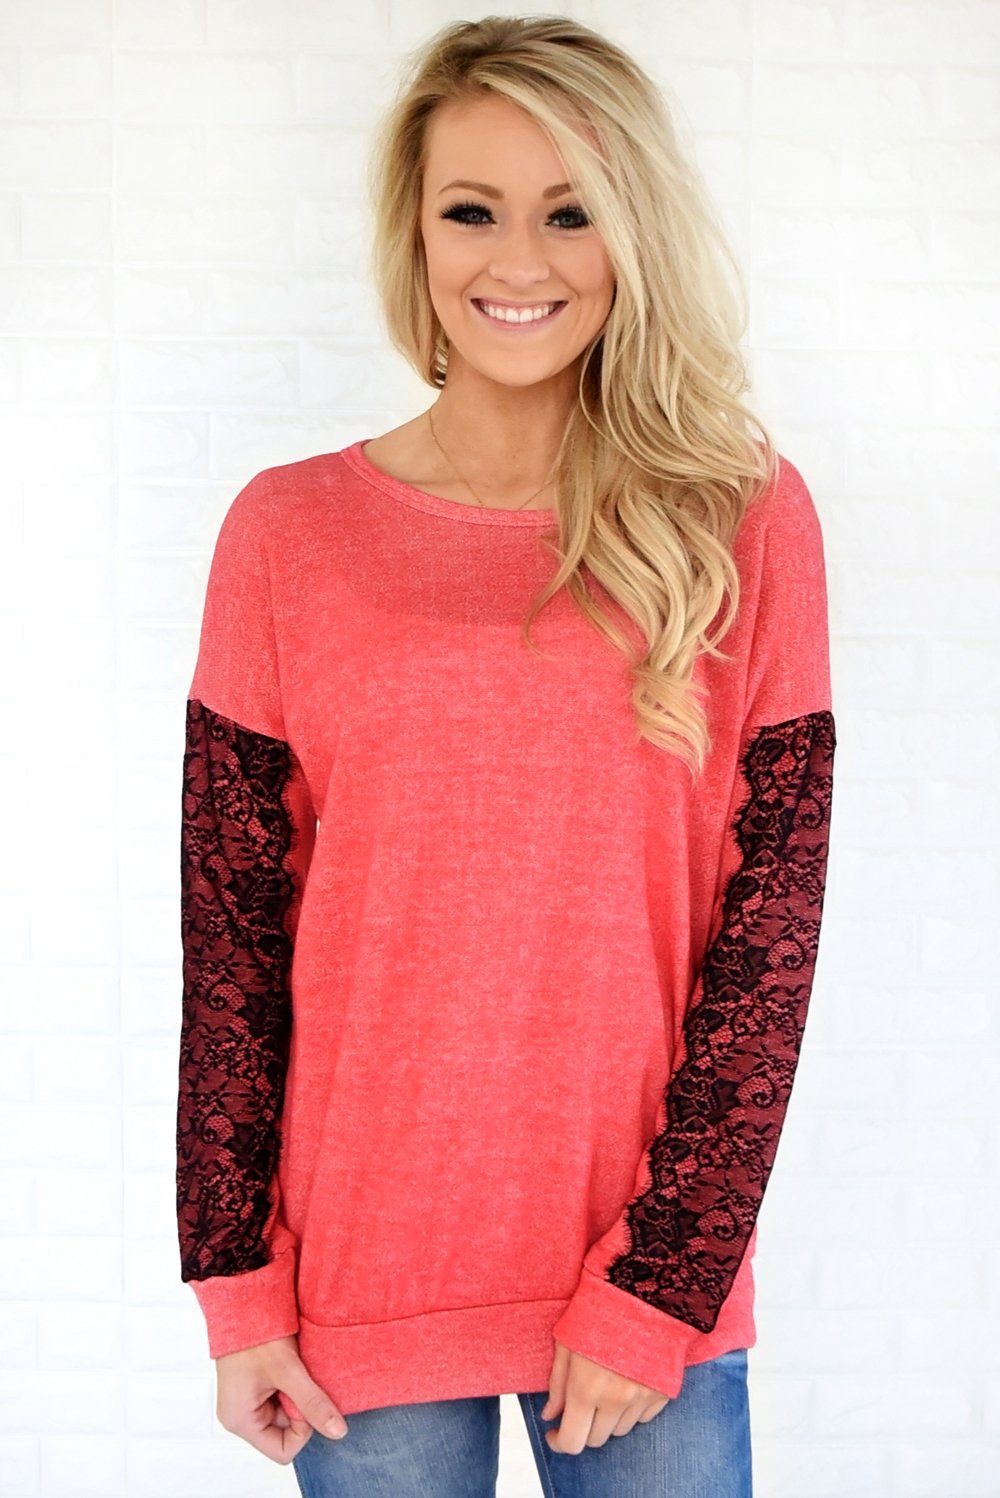 Just a Touch of Lace Sweater ~ Bright Coral